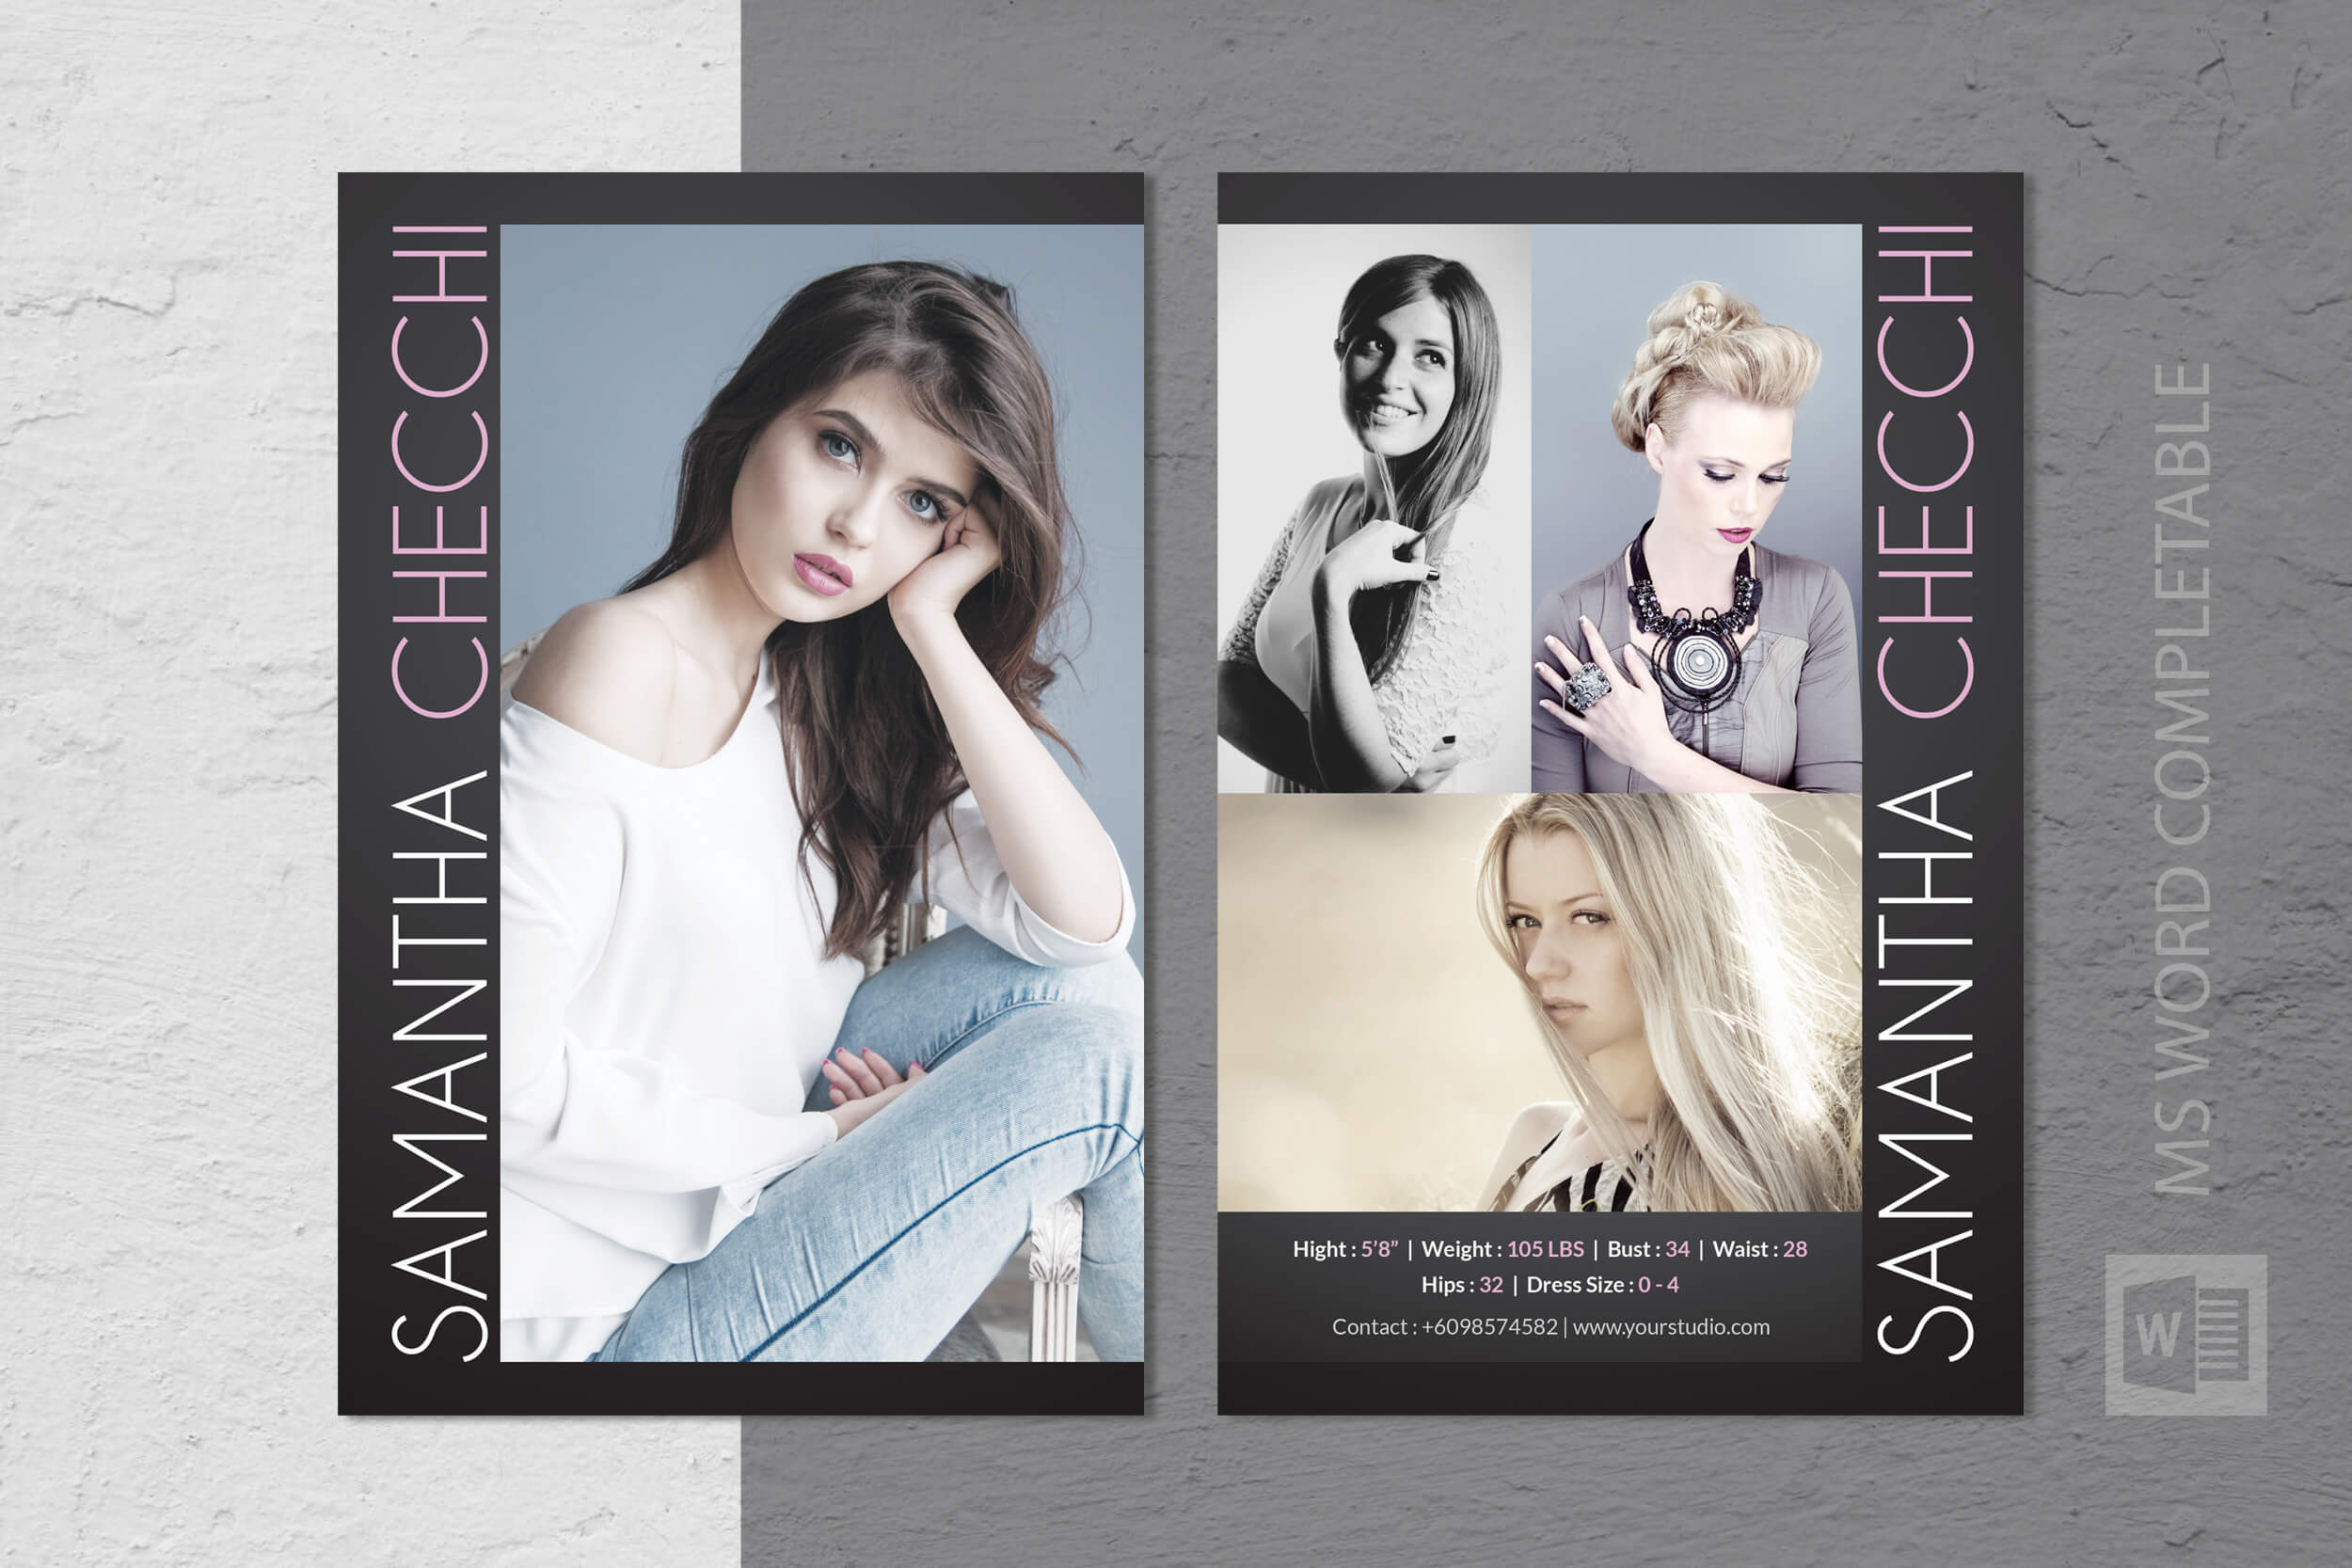 005 Model Comp Card Template Ideas Outstanding Photoshop Throughout Free Comp Card Template